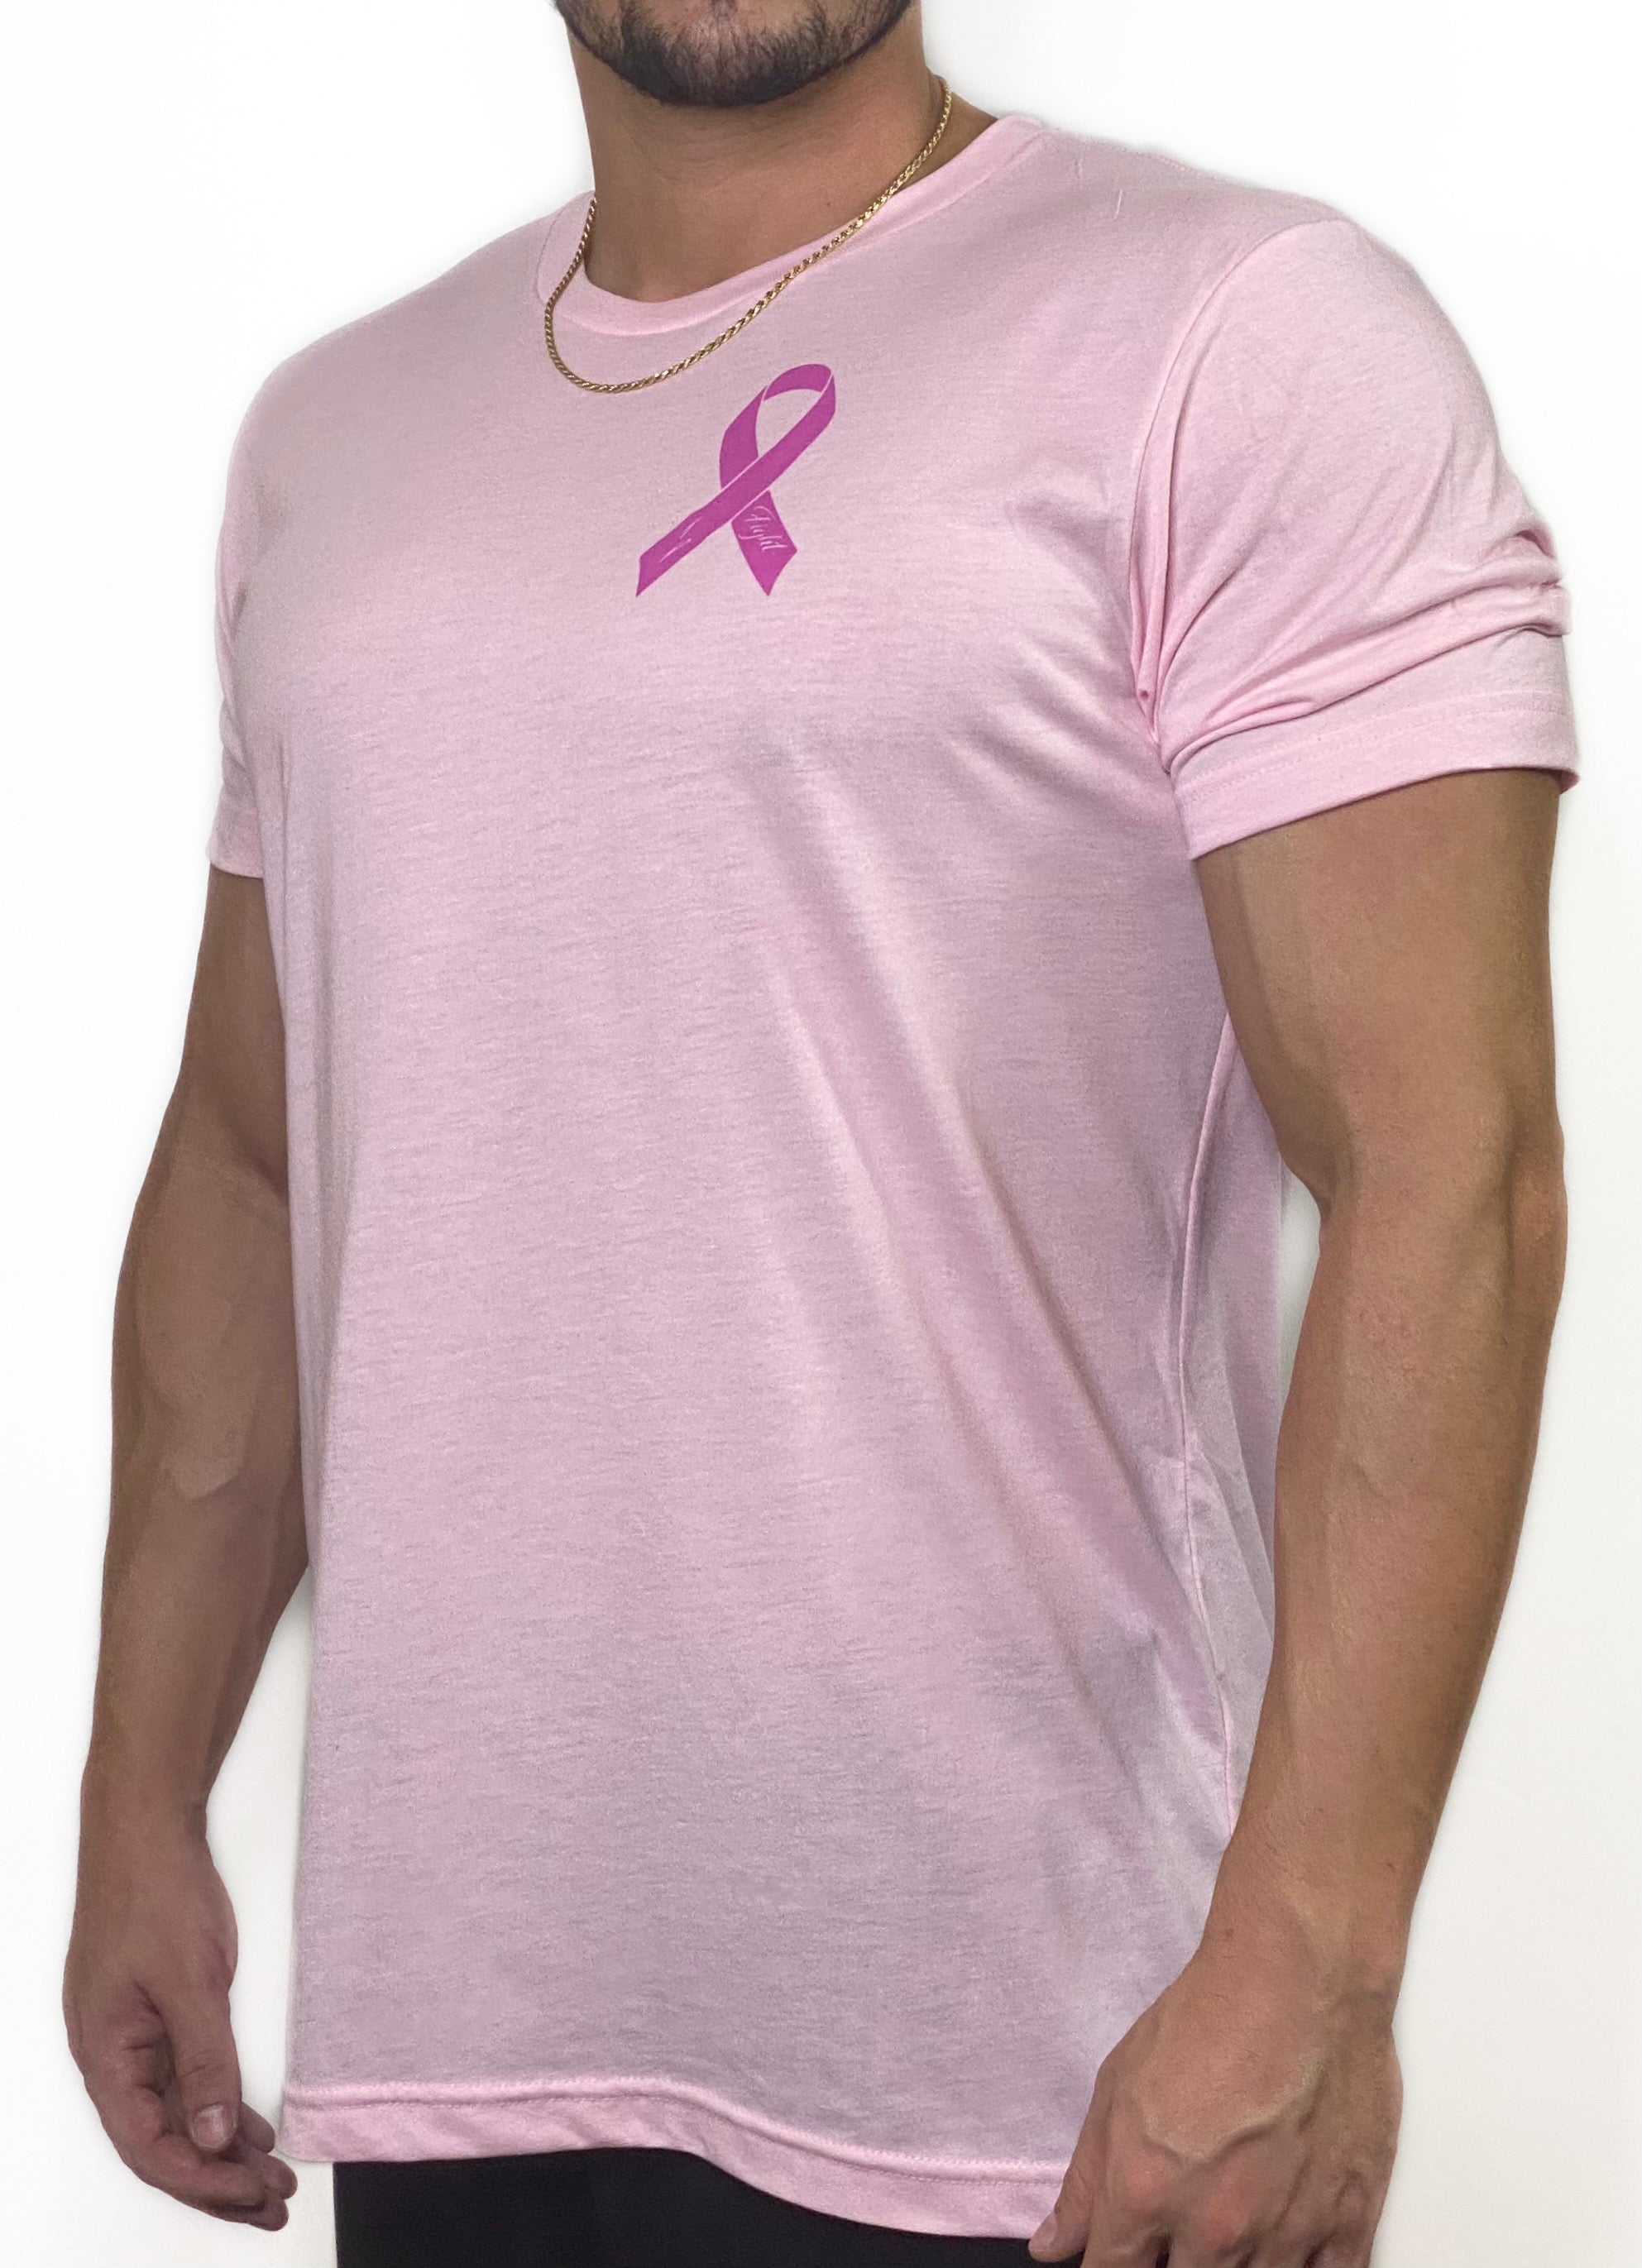 2021 Unisex Breast Cancer Awareness Tee-Baby pink/Pink